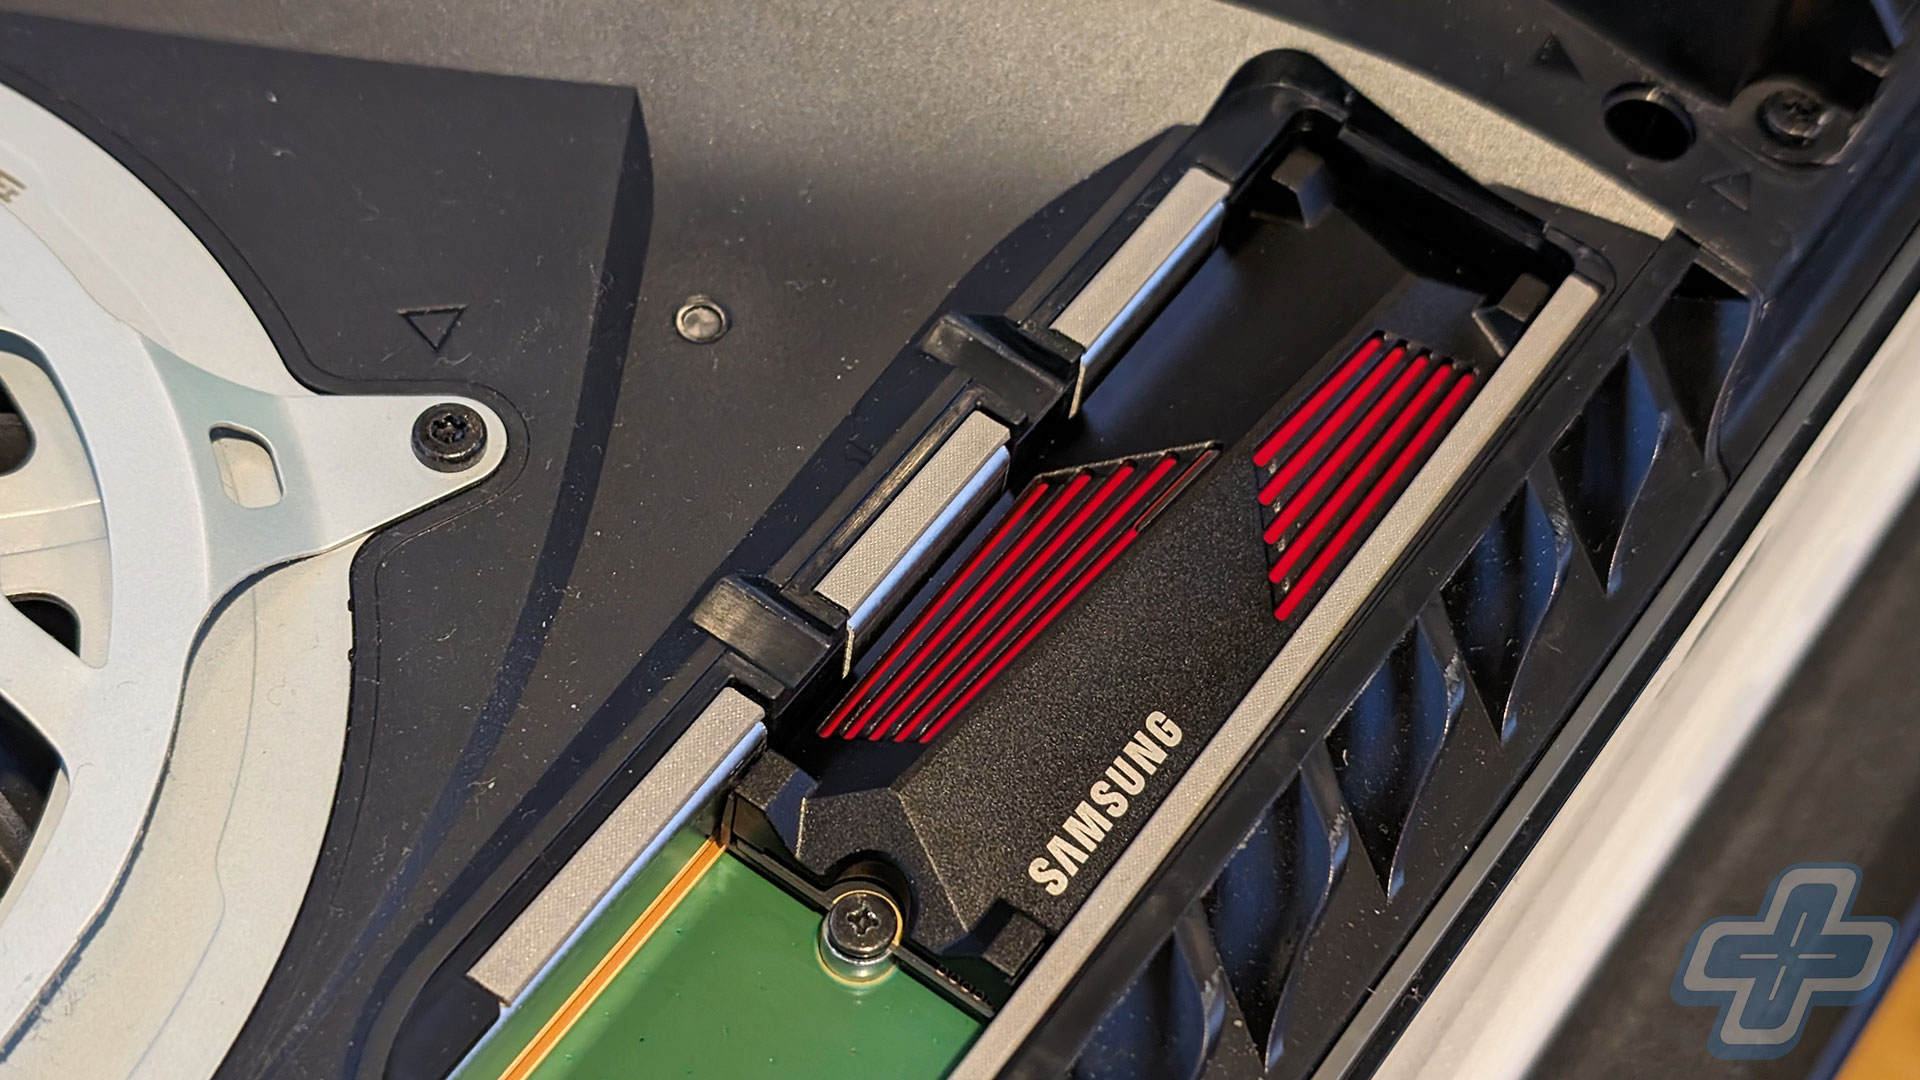 How-to add an SSD to the original PlayStation 5 console | Photo credit: Jason Siu, FullCleared